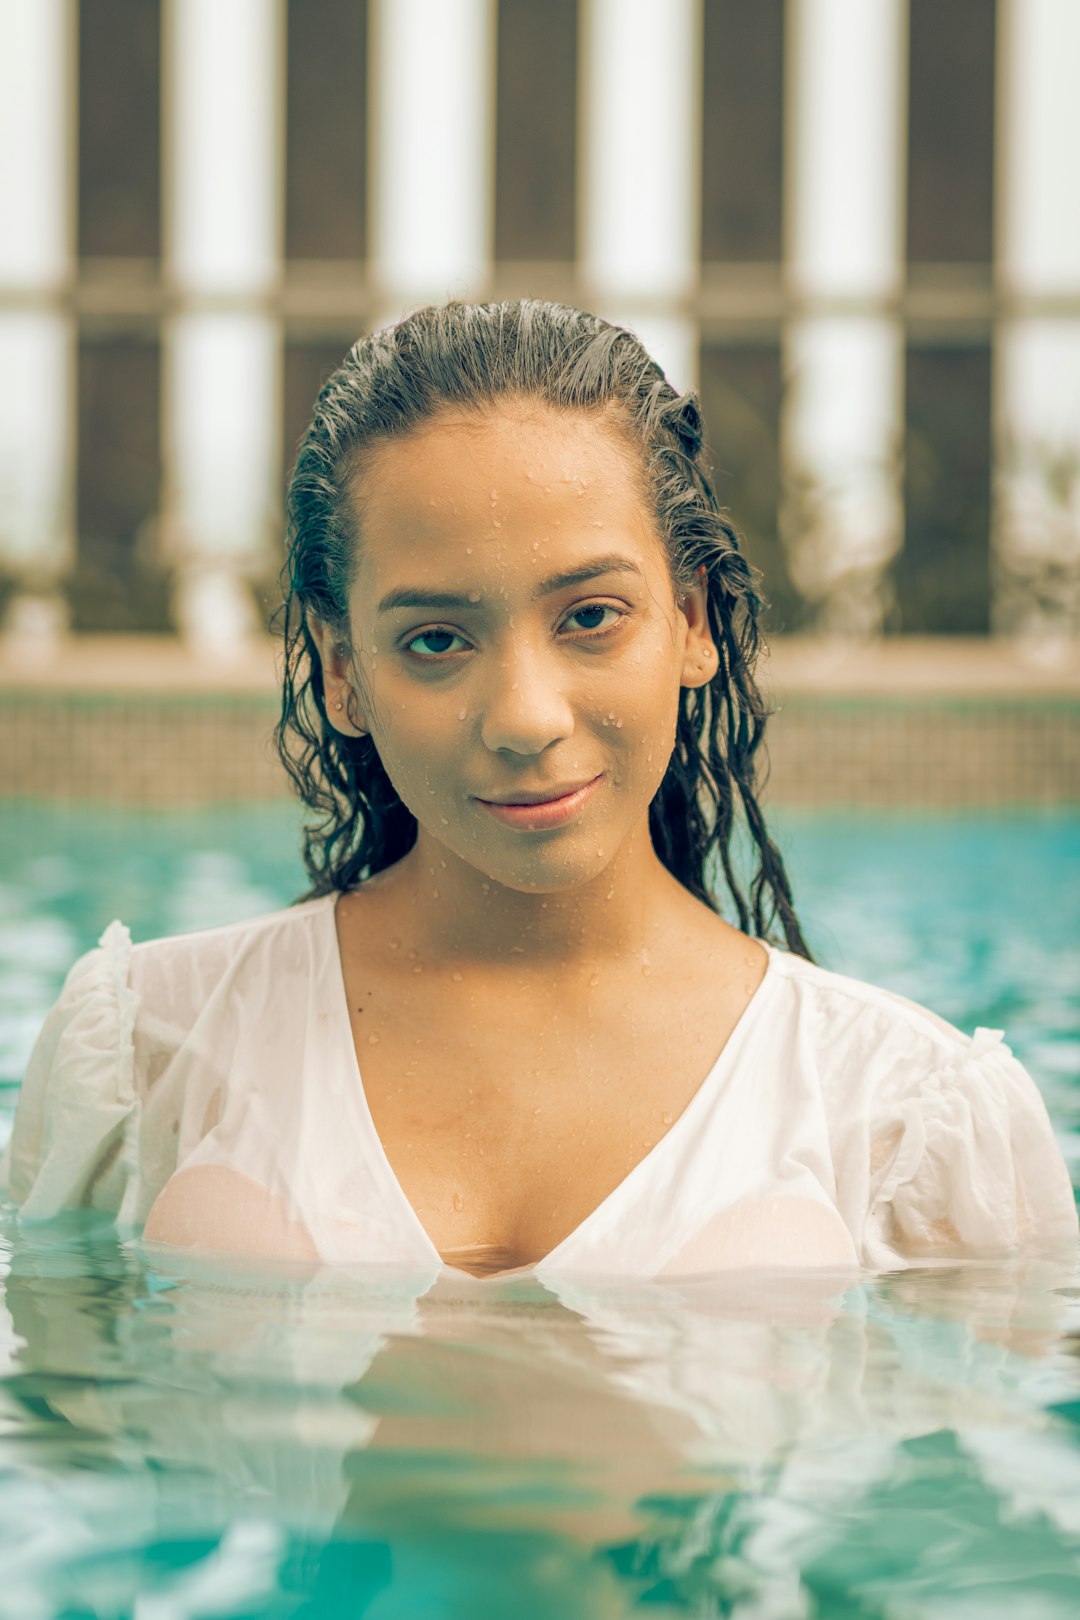 woman in white scoop neck shirt in swimming pool during daytime